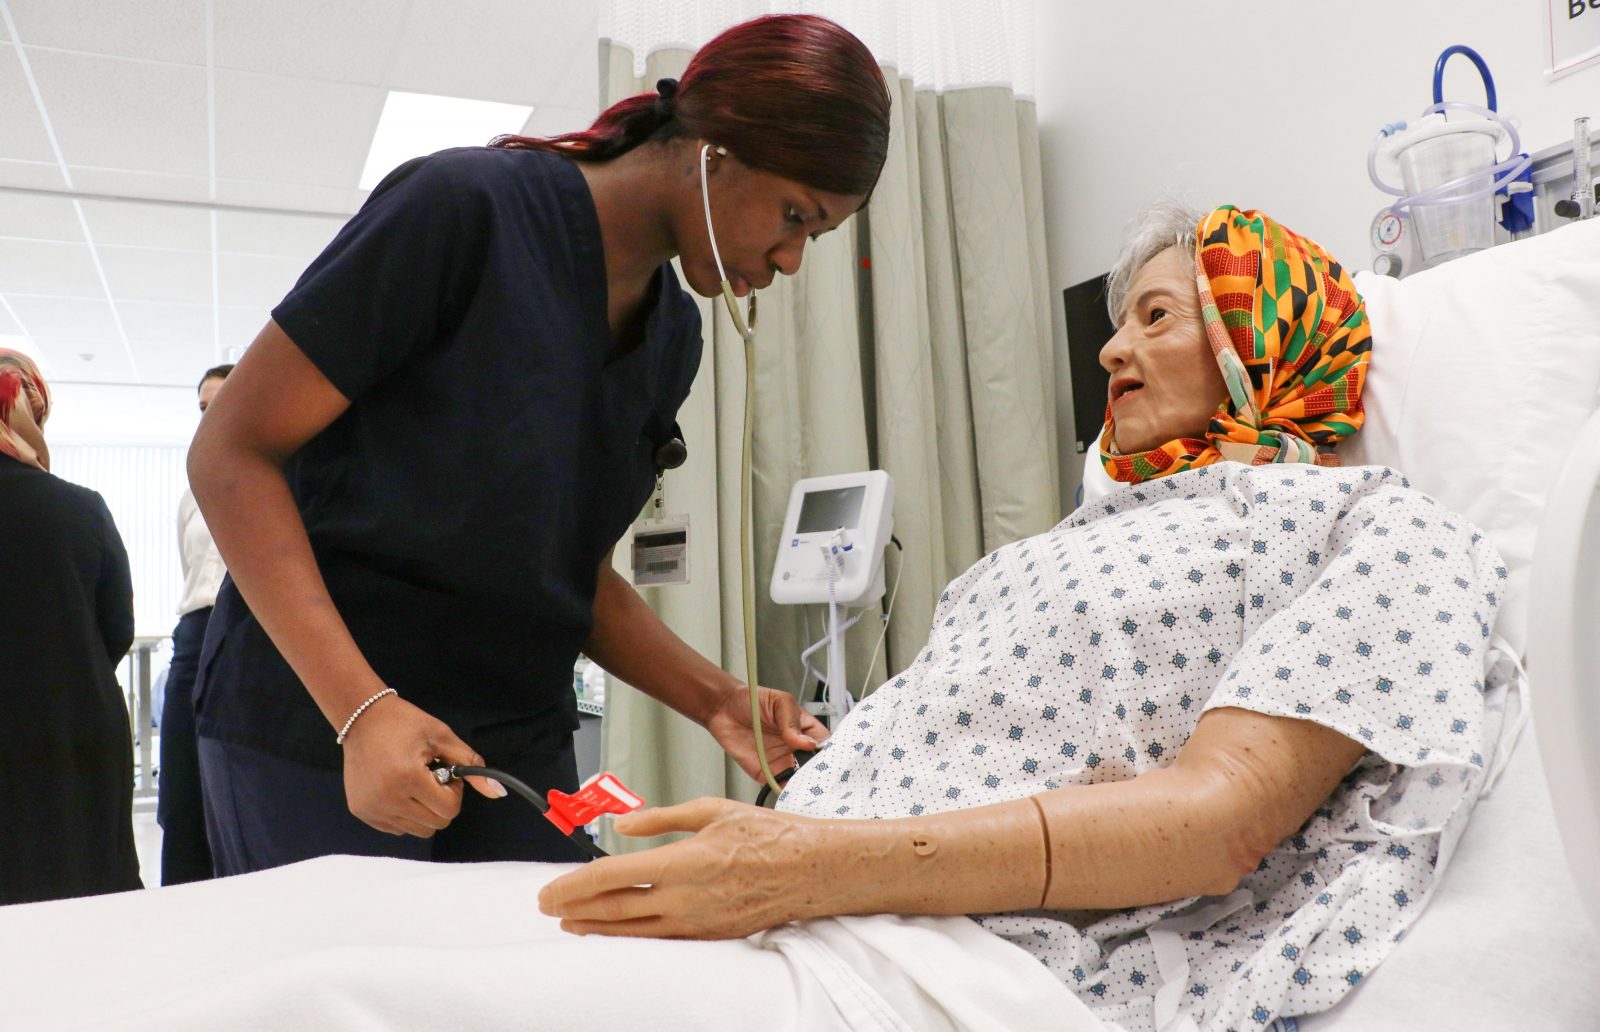 A nurse examines a patient simulator in a nursing lab designed to look like a hospital room.